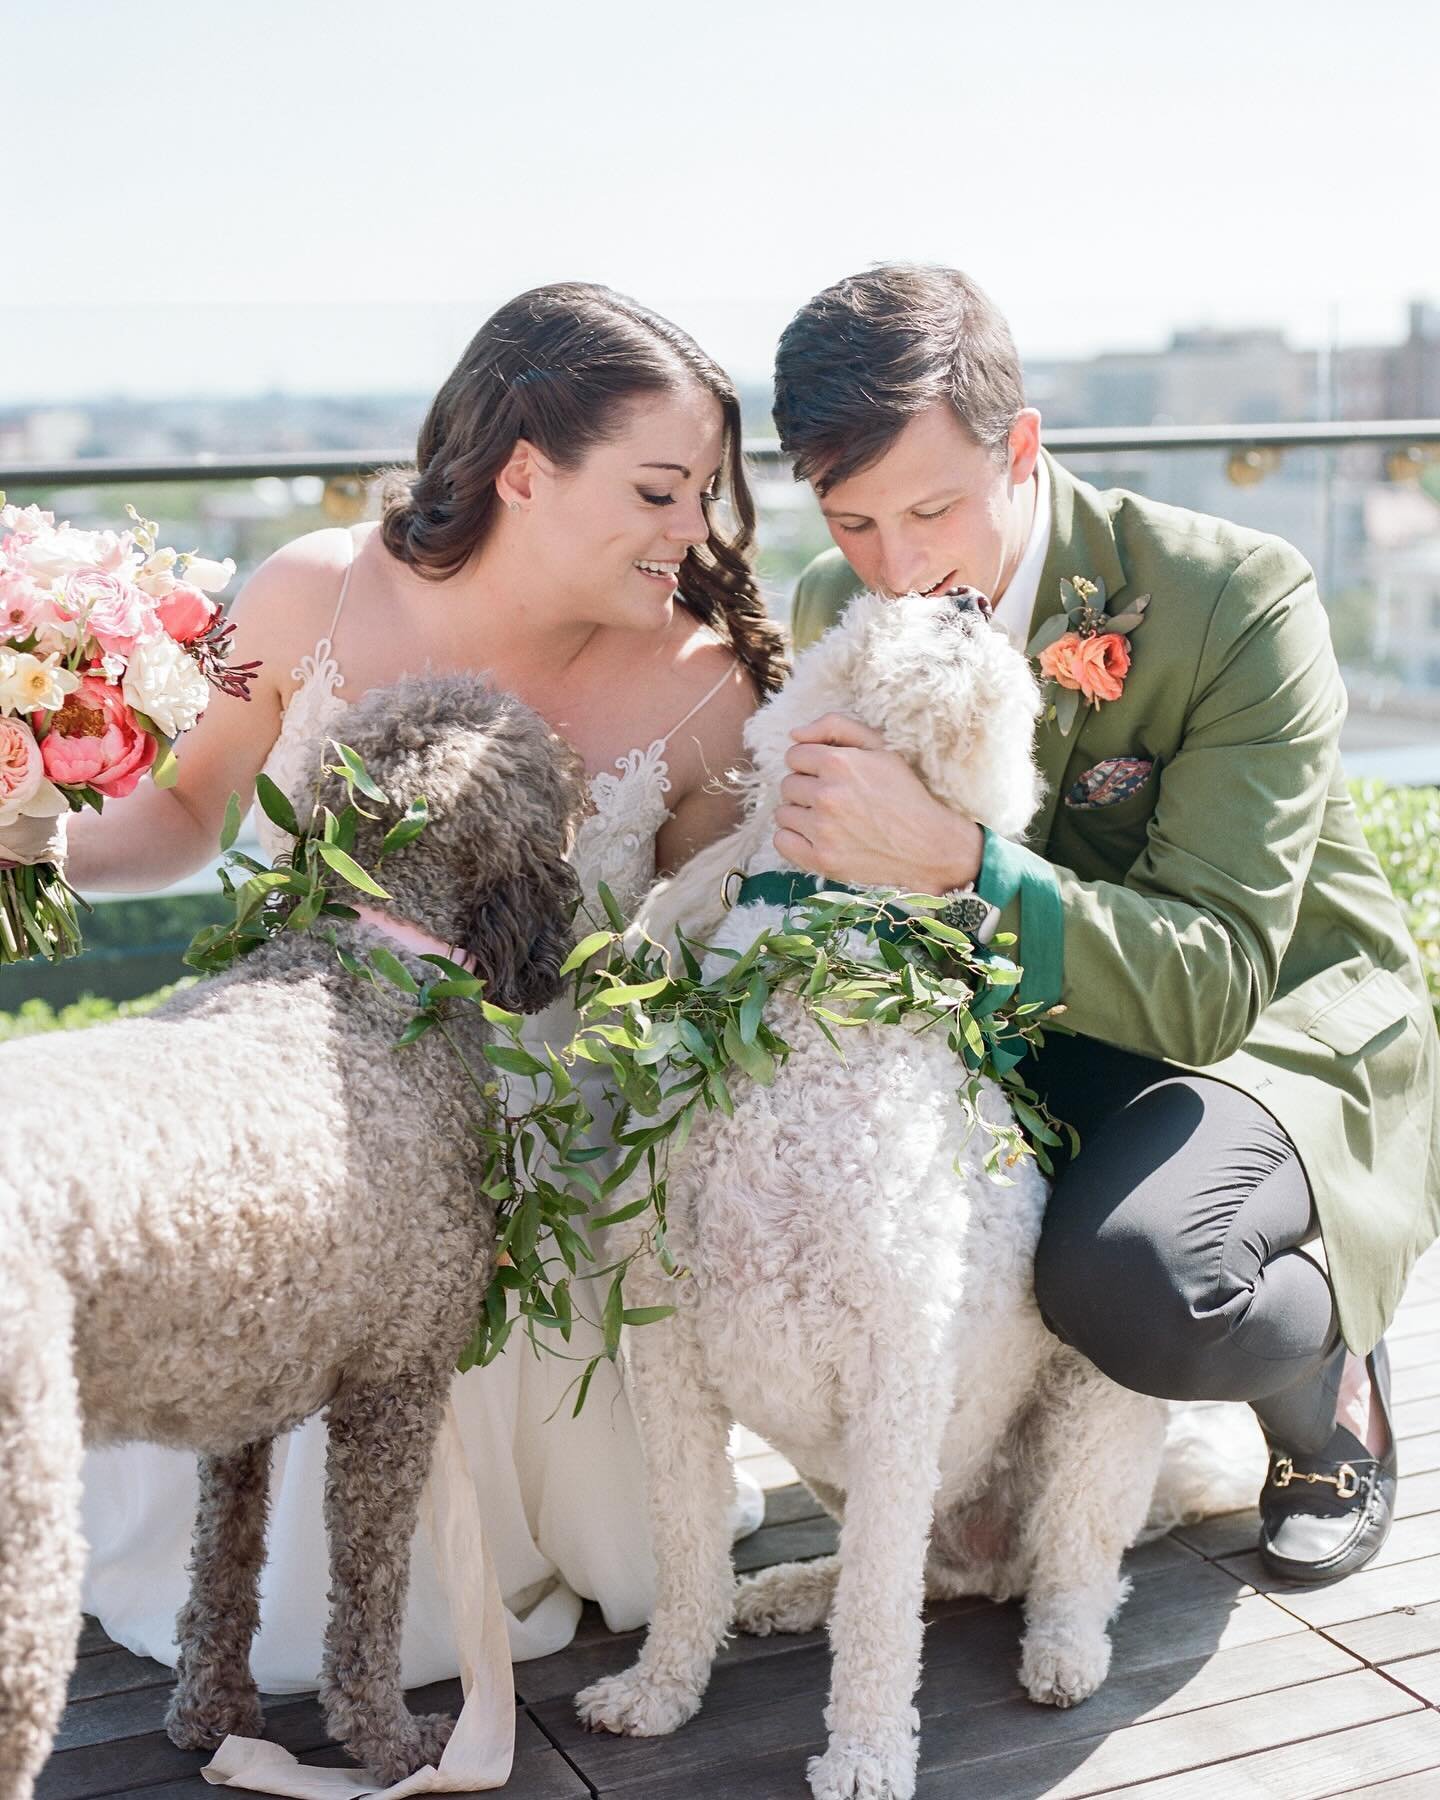 If the question is &ldquo;should I include my fur family in my photos?&rdquo;, my answer is always YES! (And @fureveralways is the very best assistance with this on a wedding day, so your pet is spoiled and on time for their big moments)
Happy Nation